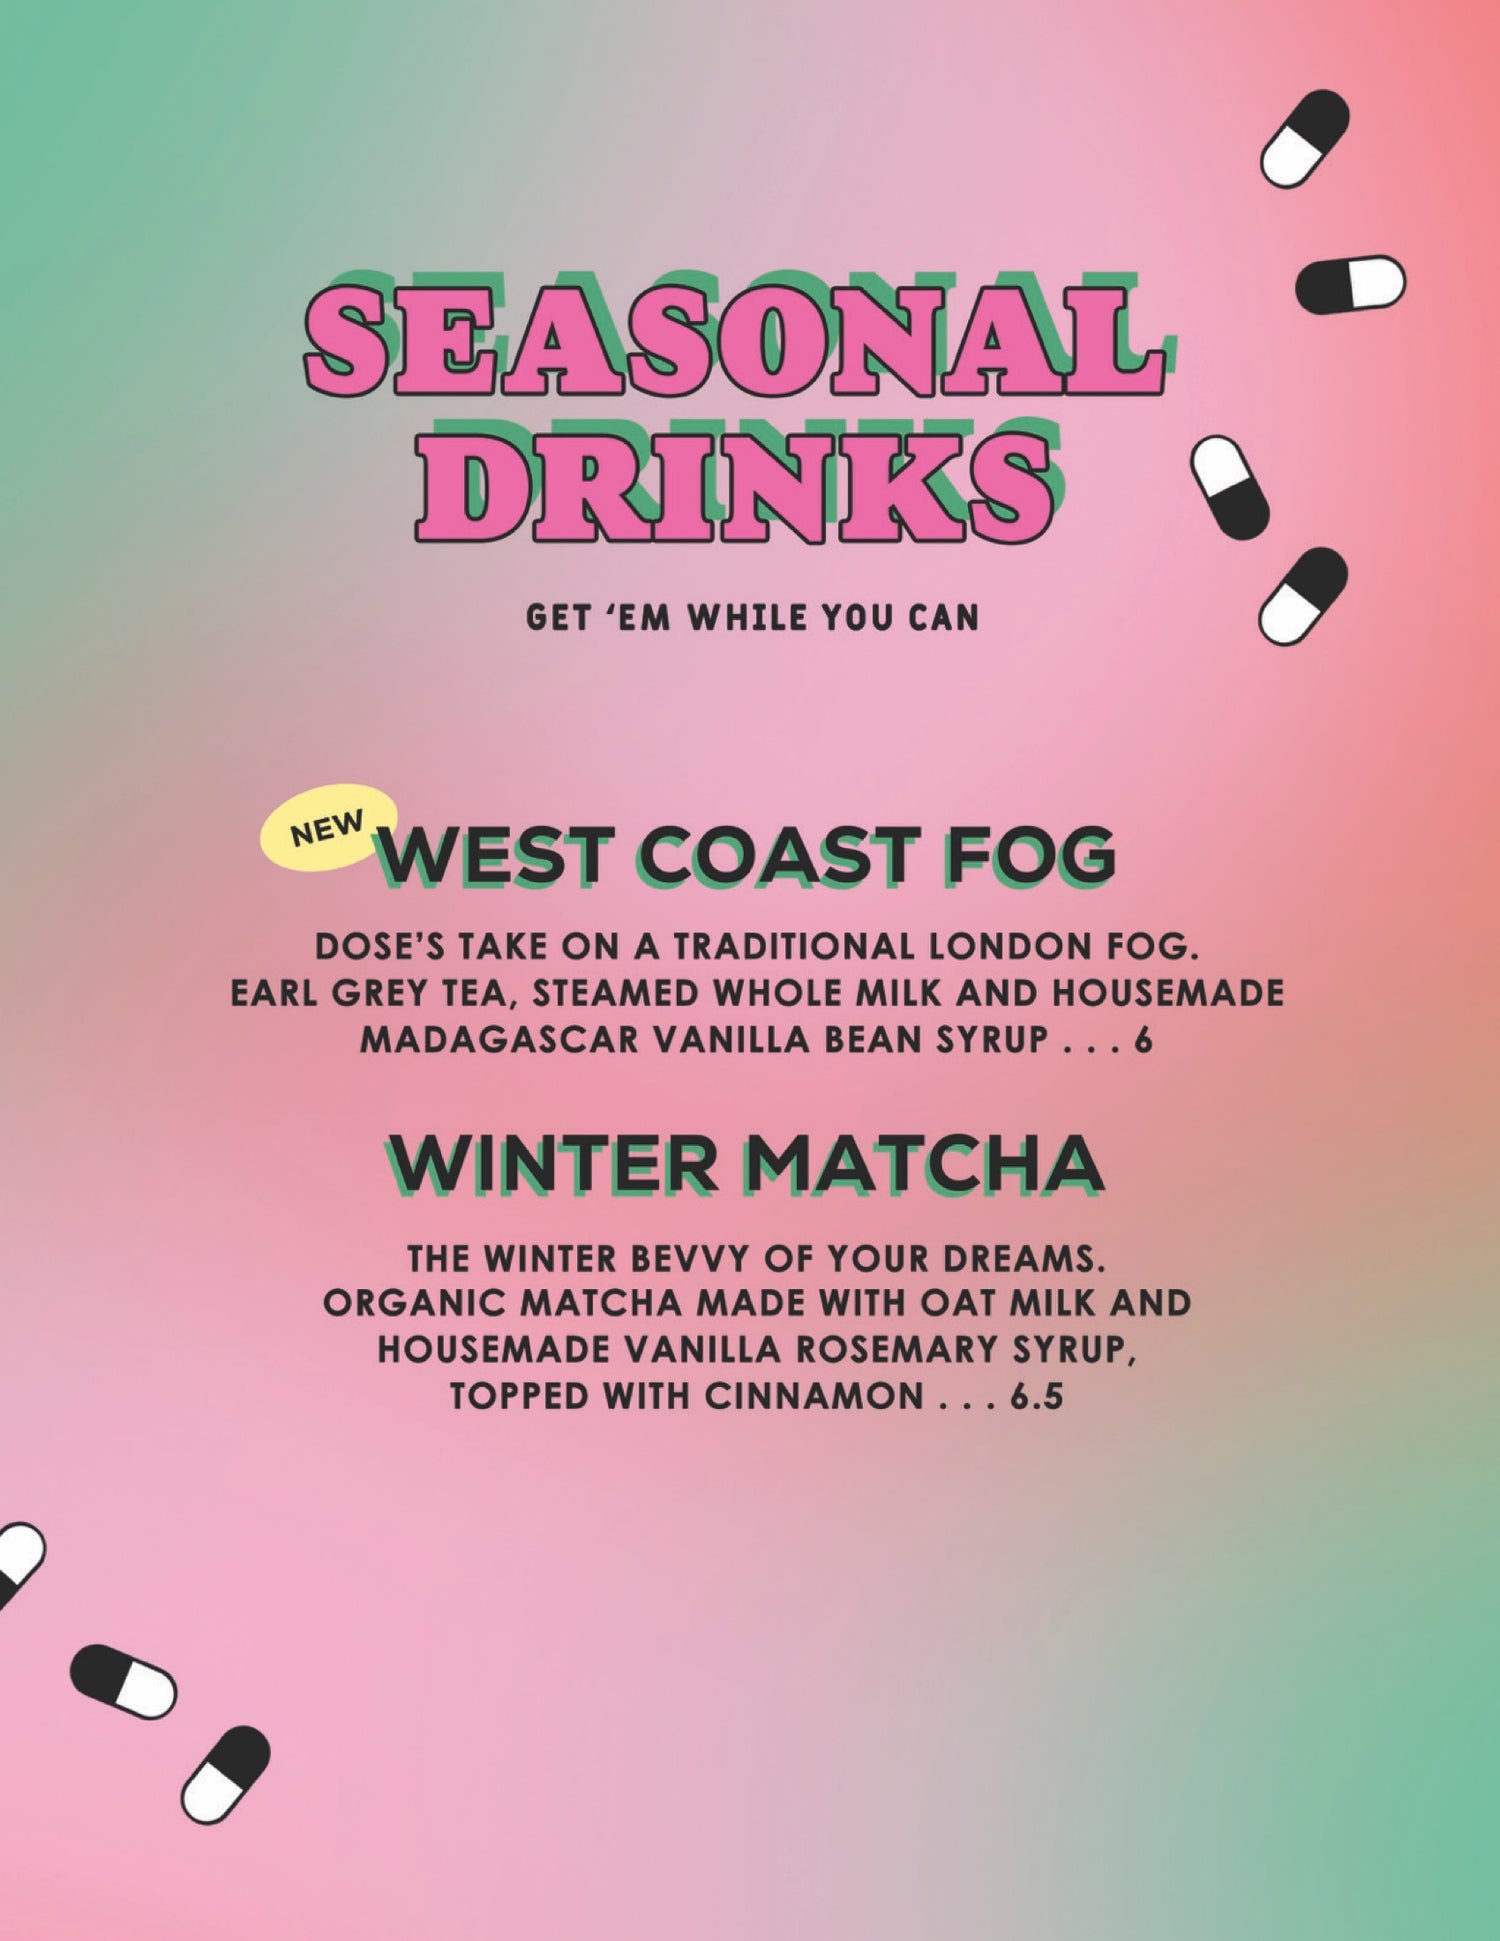 WEST COAST FOG DOSE'S TAKE ON ATRADITIONAL LONDON FOG. EARL GREY TEA, STEAMED WHOLE MILK AND HOUSEMADE MADAGASCAR VANILLA BEAN SYRUP . . . 6 WINTER MATCHA THE WINTER BEVVY OF YOUR DREAMS. ORGANIC MATCHA MADE WITH OAT MILK AND HOUSEMADE VANILLA ROSEMARY SYRUP, TOPPED WITH CINNAMON . . . 6.5